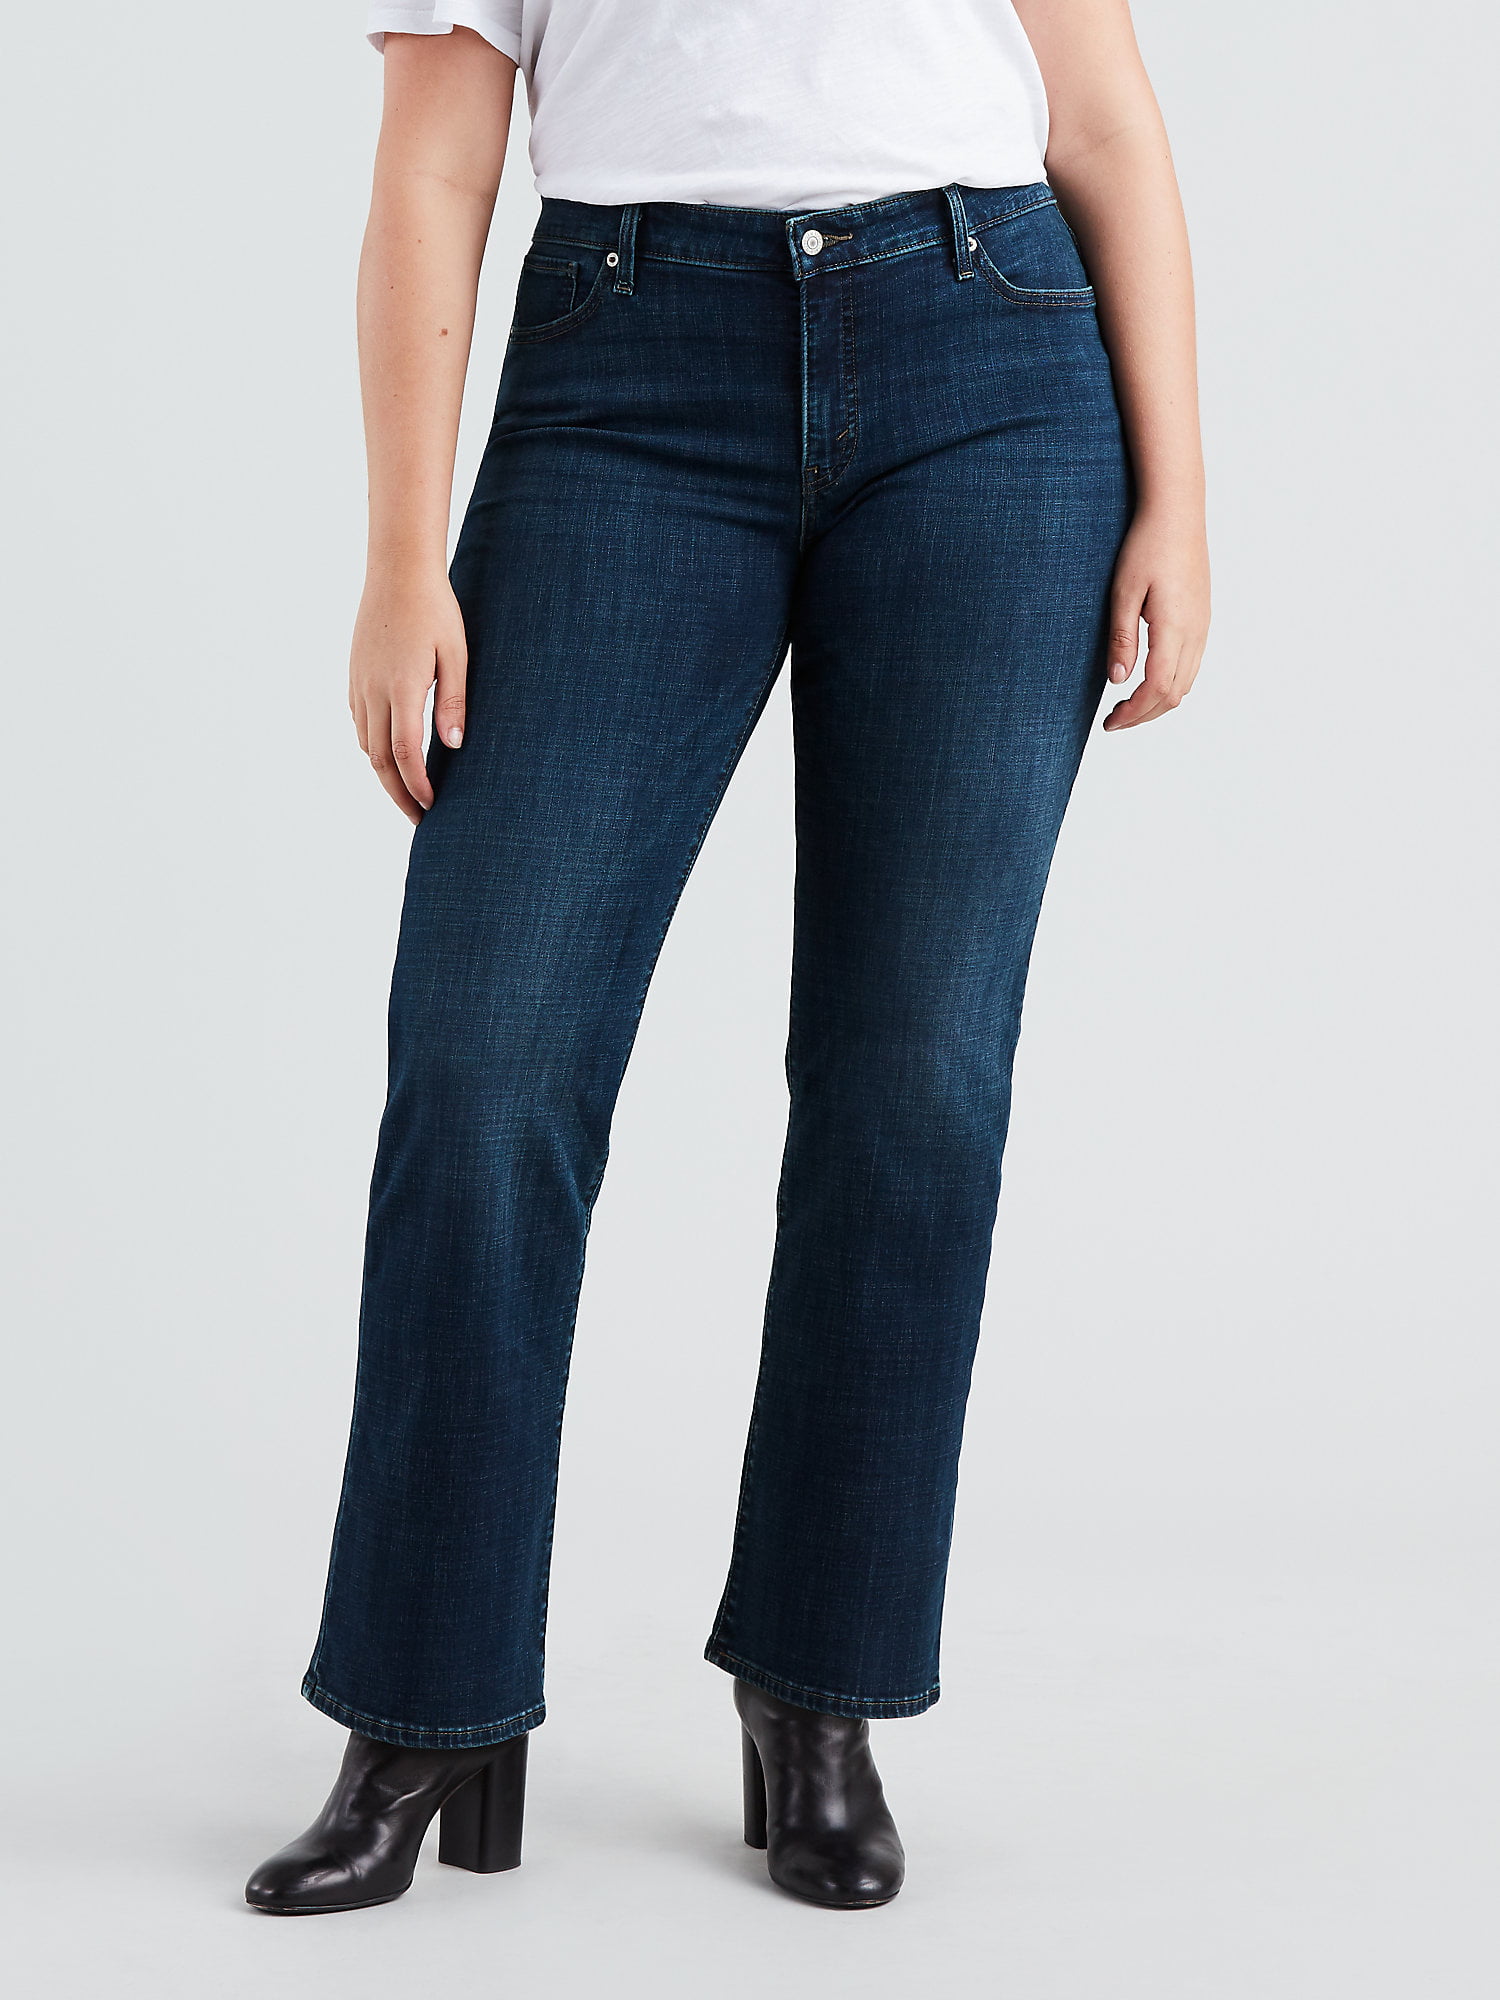 levi's 415 relaxed bootcut jeans